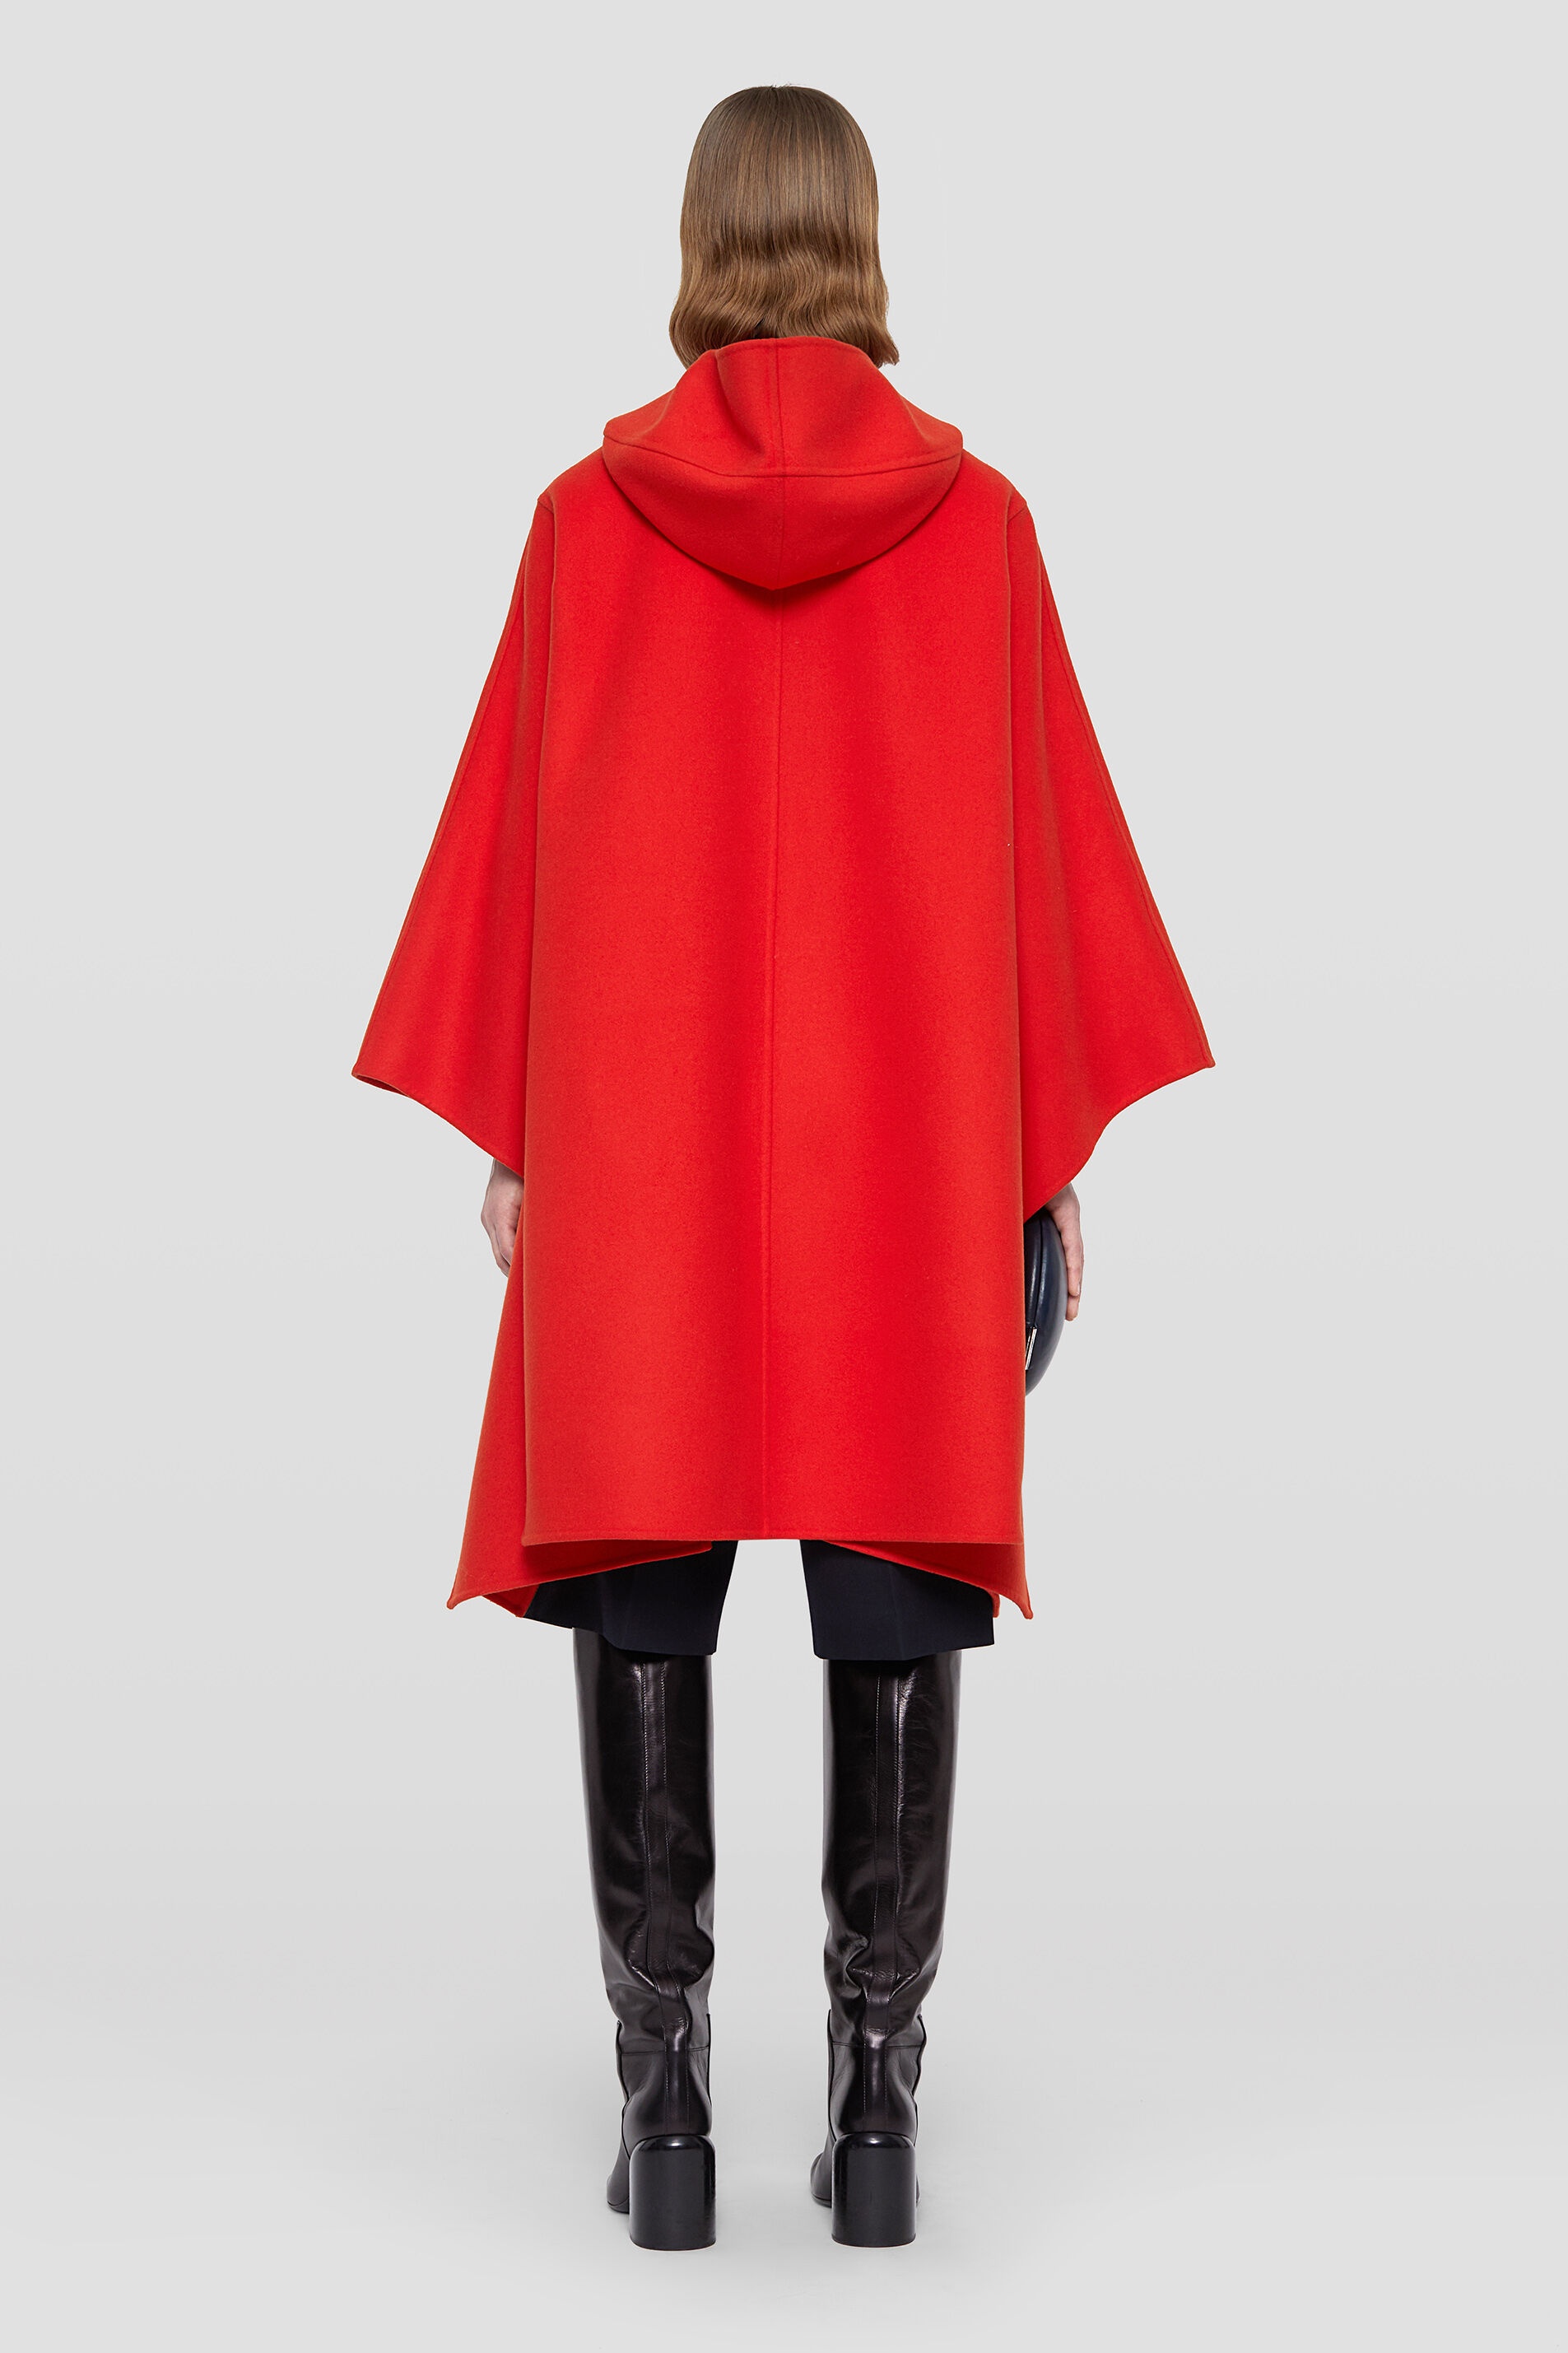 Hooded Cape - 4